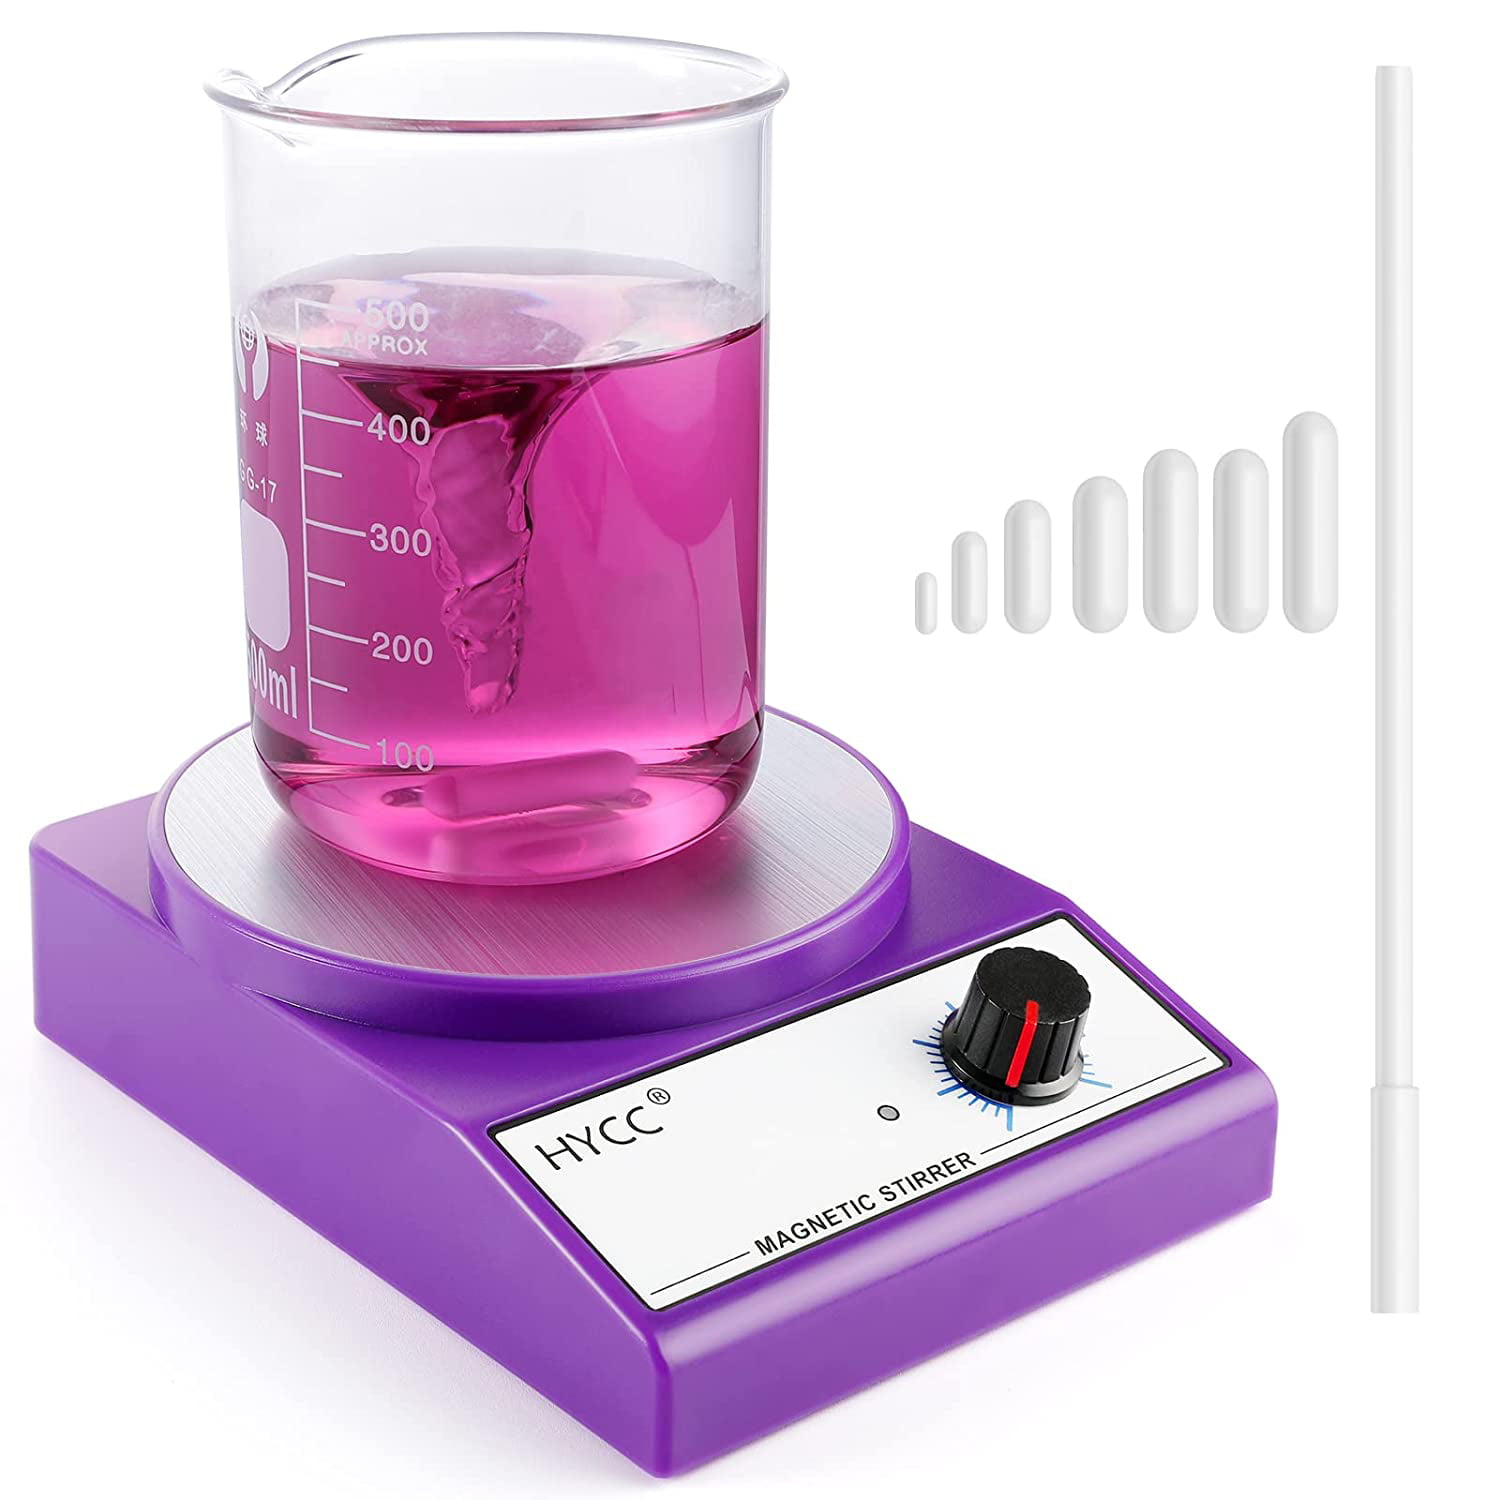 Laboratory chemistry magnetic stirrer magnetic mixer with stir bar 3000 rpm